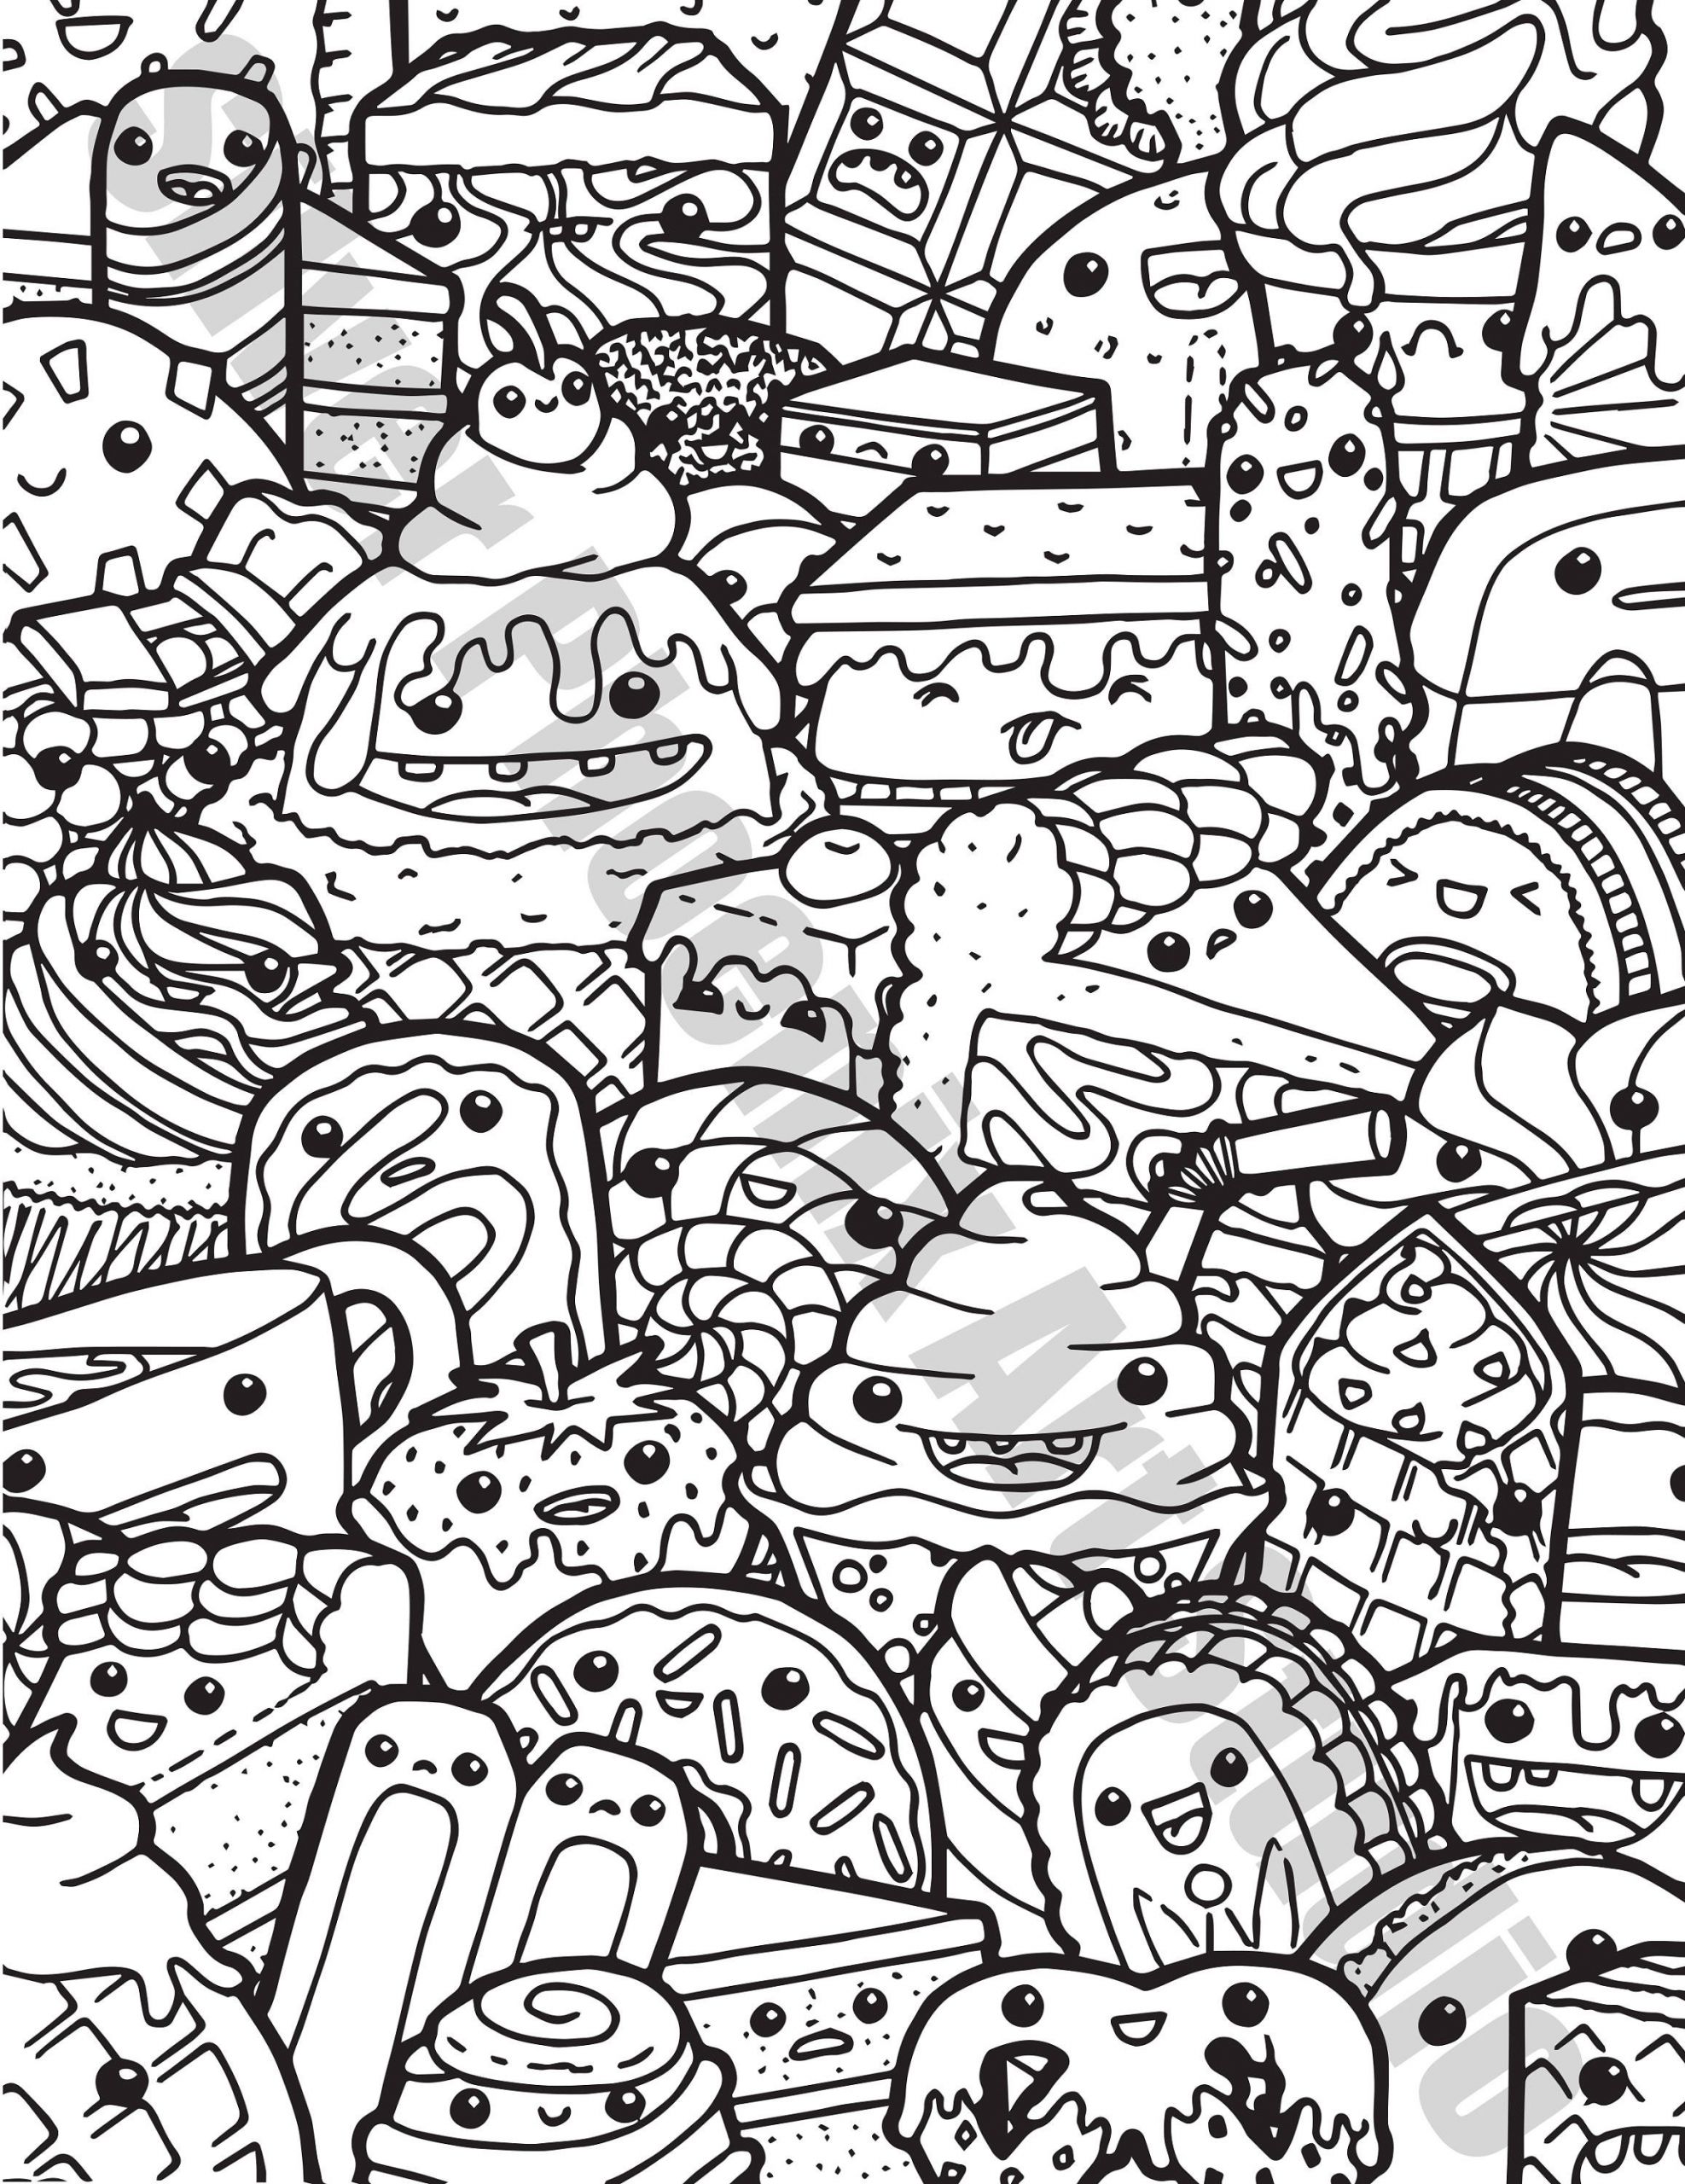 Cute Coloring Pages For Adults
 Kawaii Sweets Doodle Adult Coloring Page Printable Digital